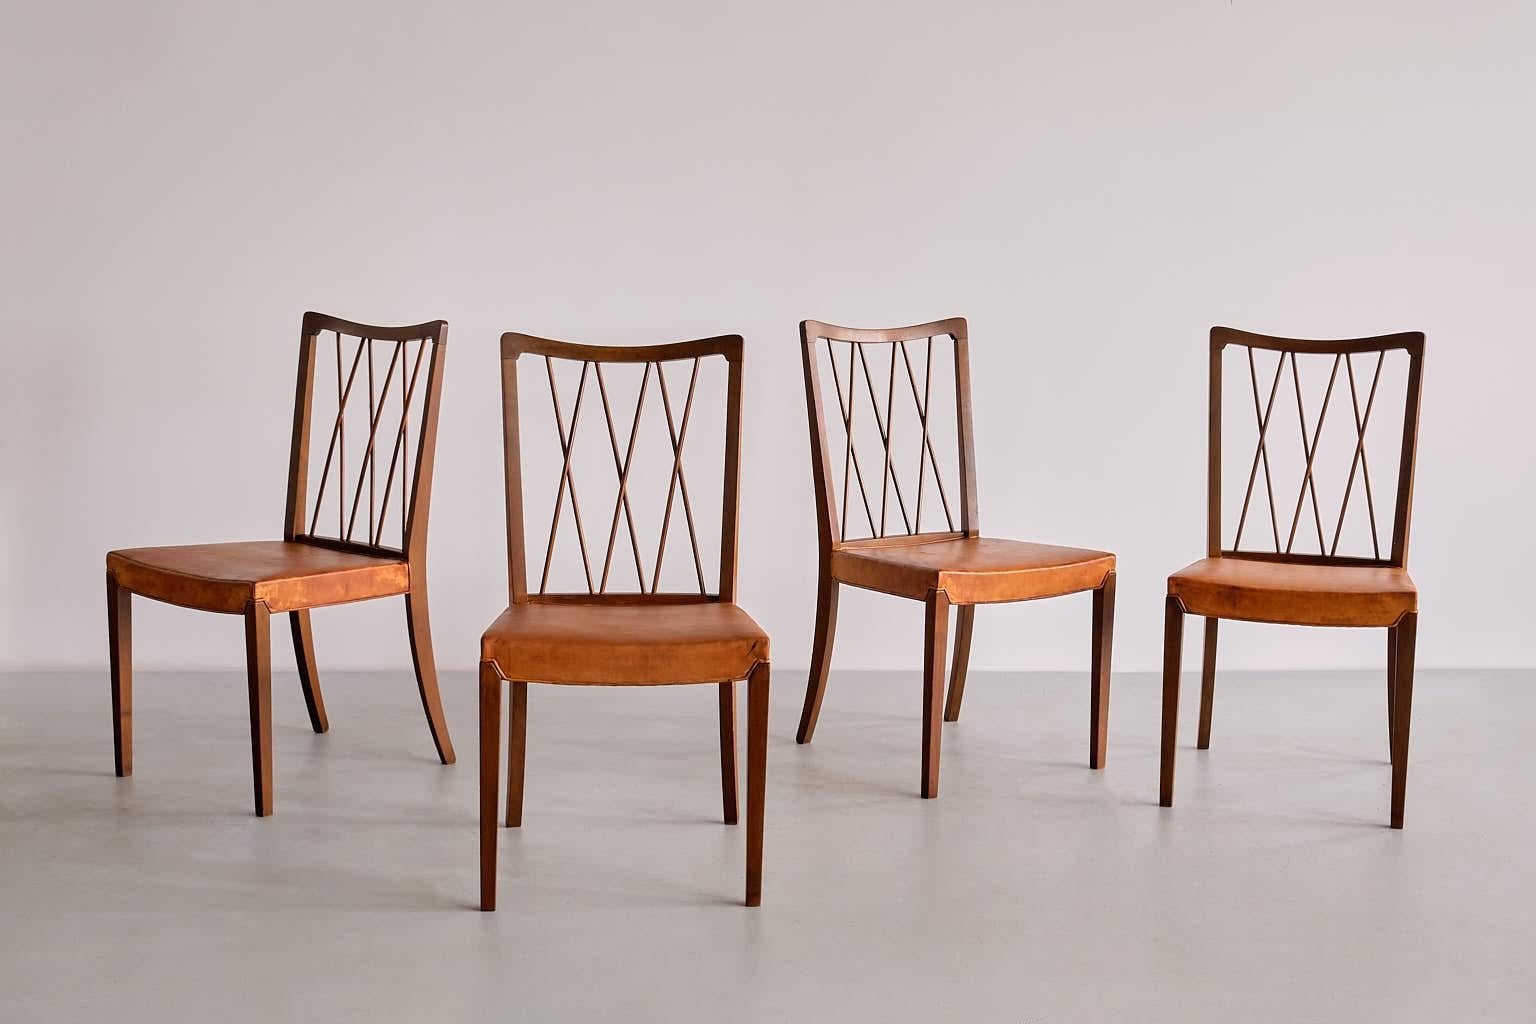 Scandinavian Modern Set of Eight Frode Holm Dining Chairs, Walnut and Leather, Illum, Denmark, 1940s For Sale